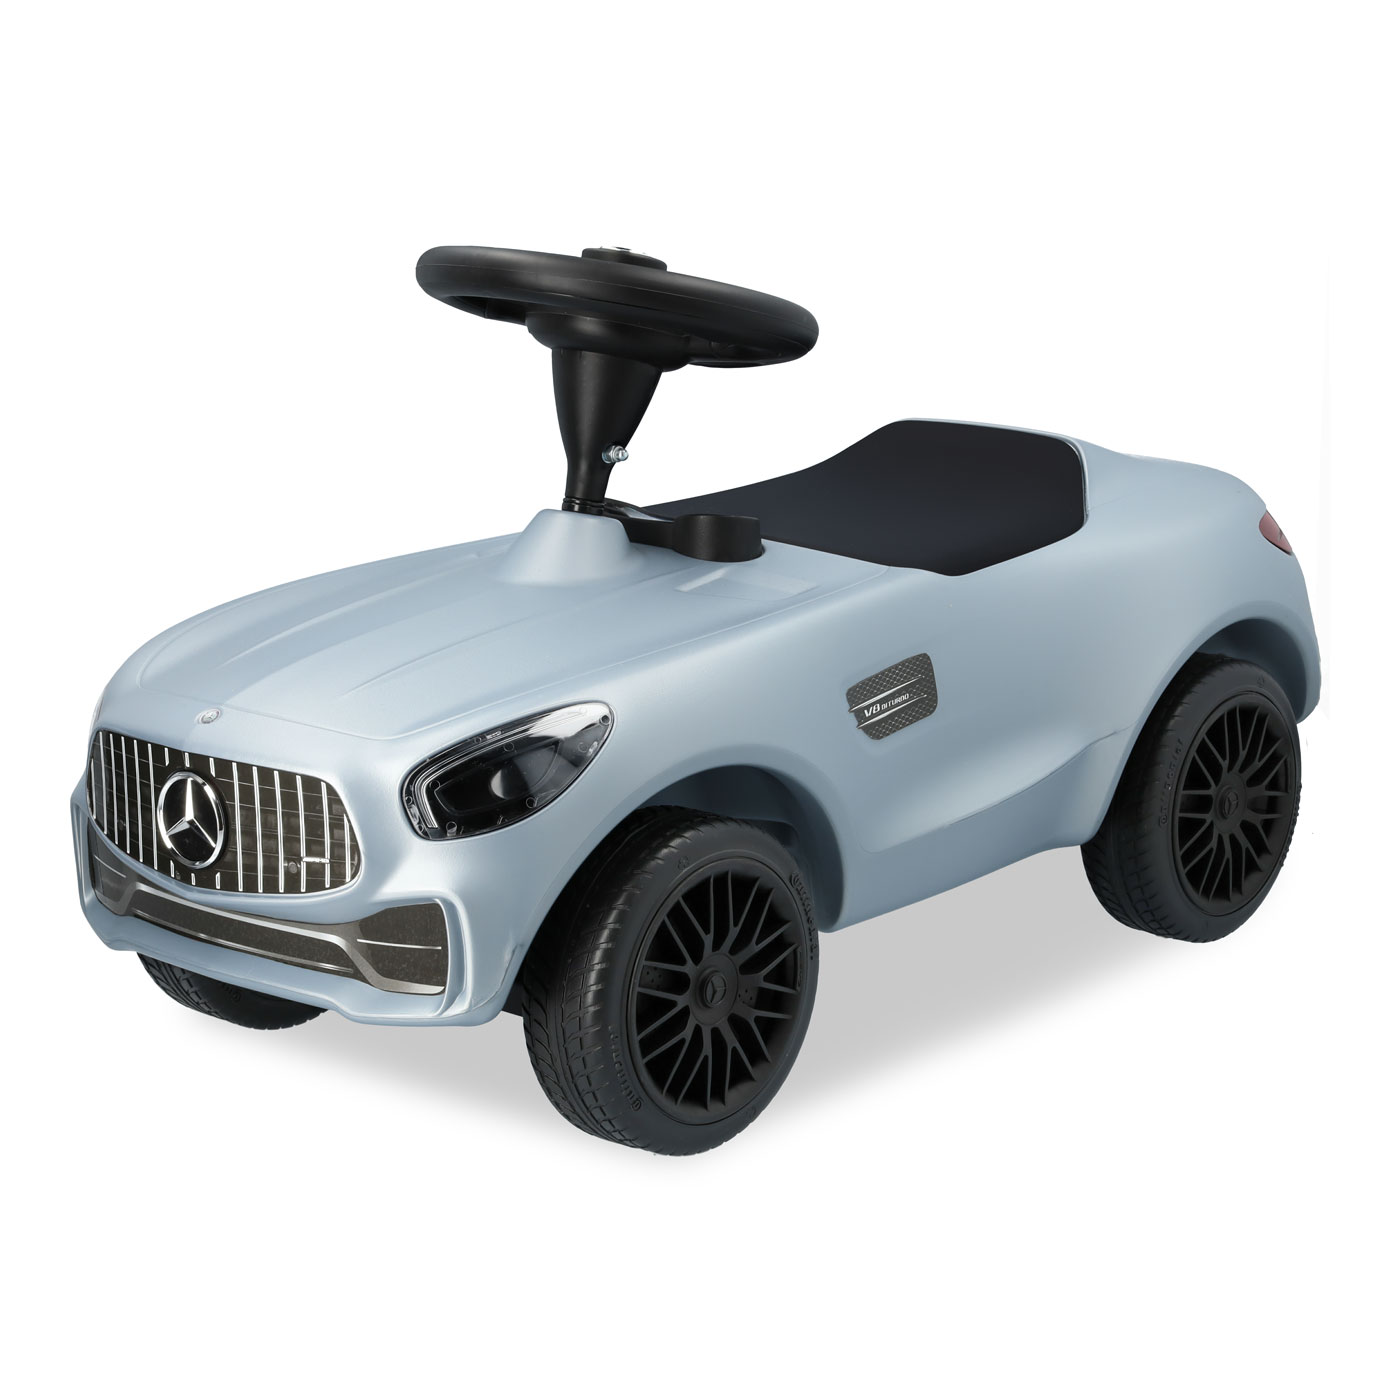 Ride-On Toy Car Bobby-AMG GT | Mercedes-Benz Lifestyle Collection